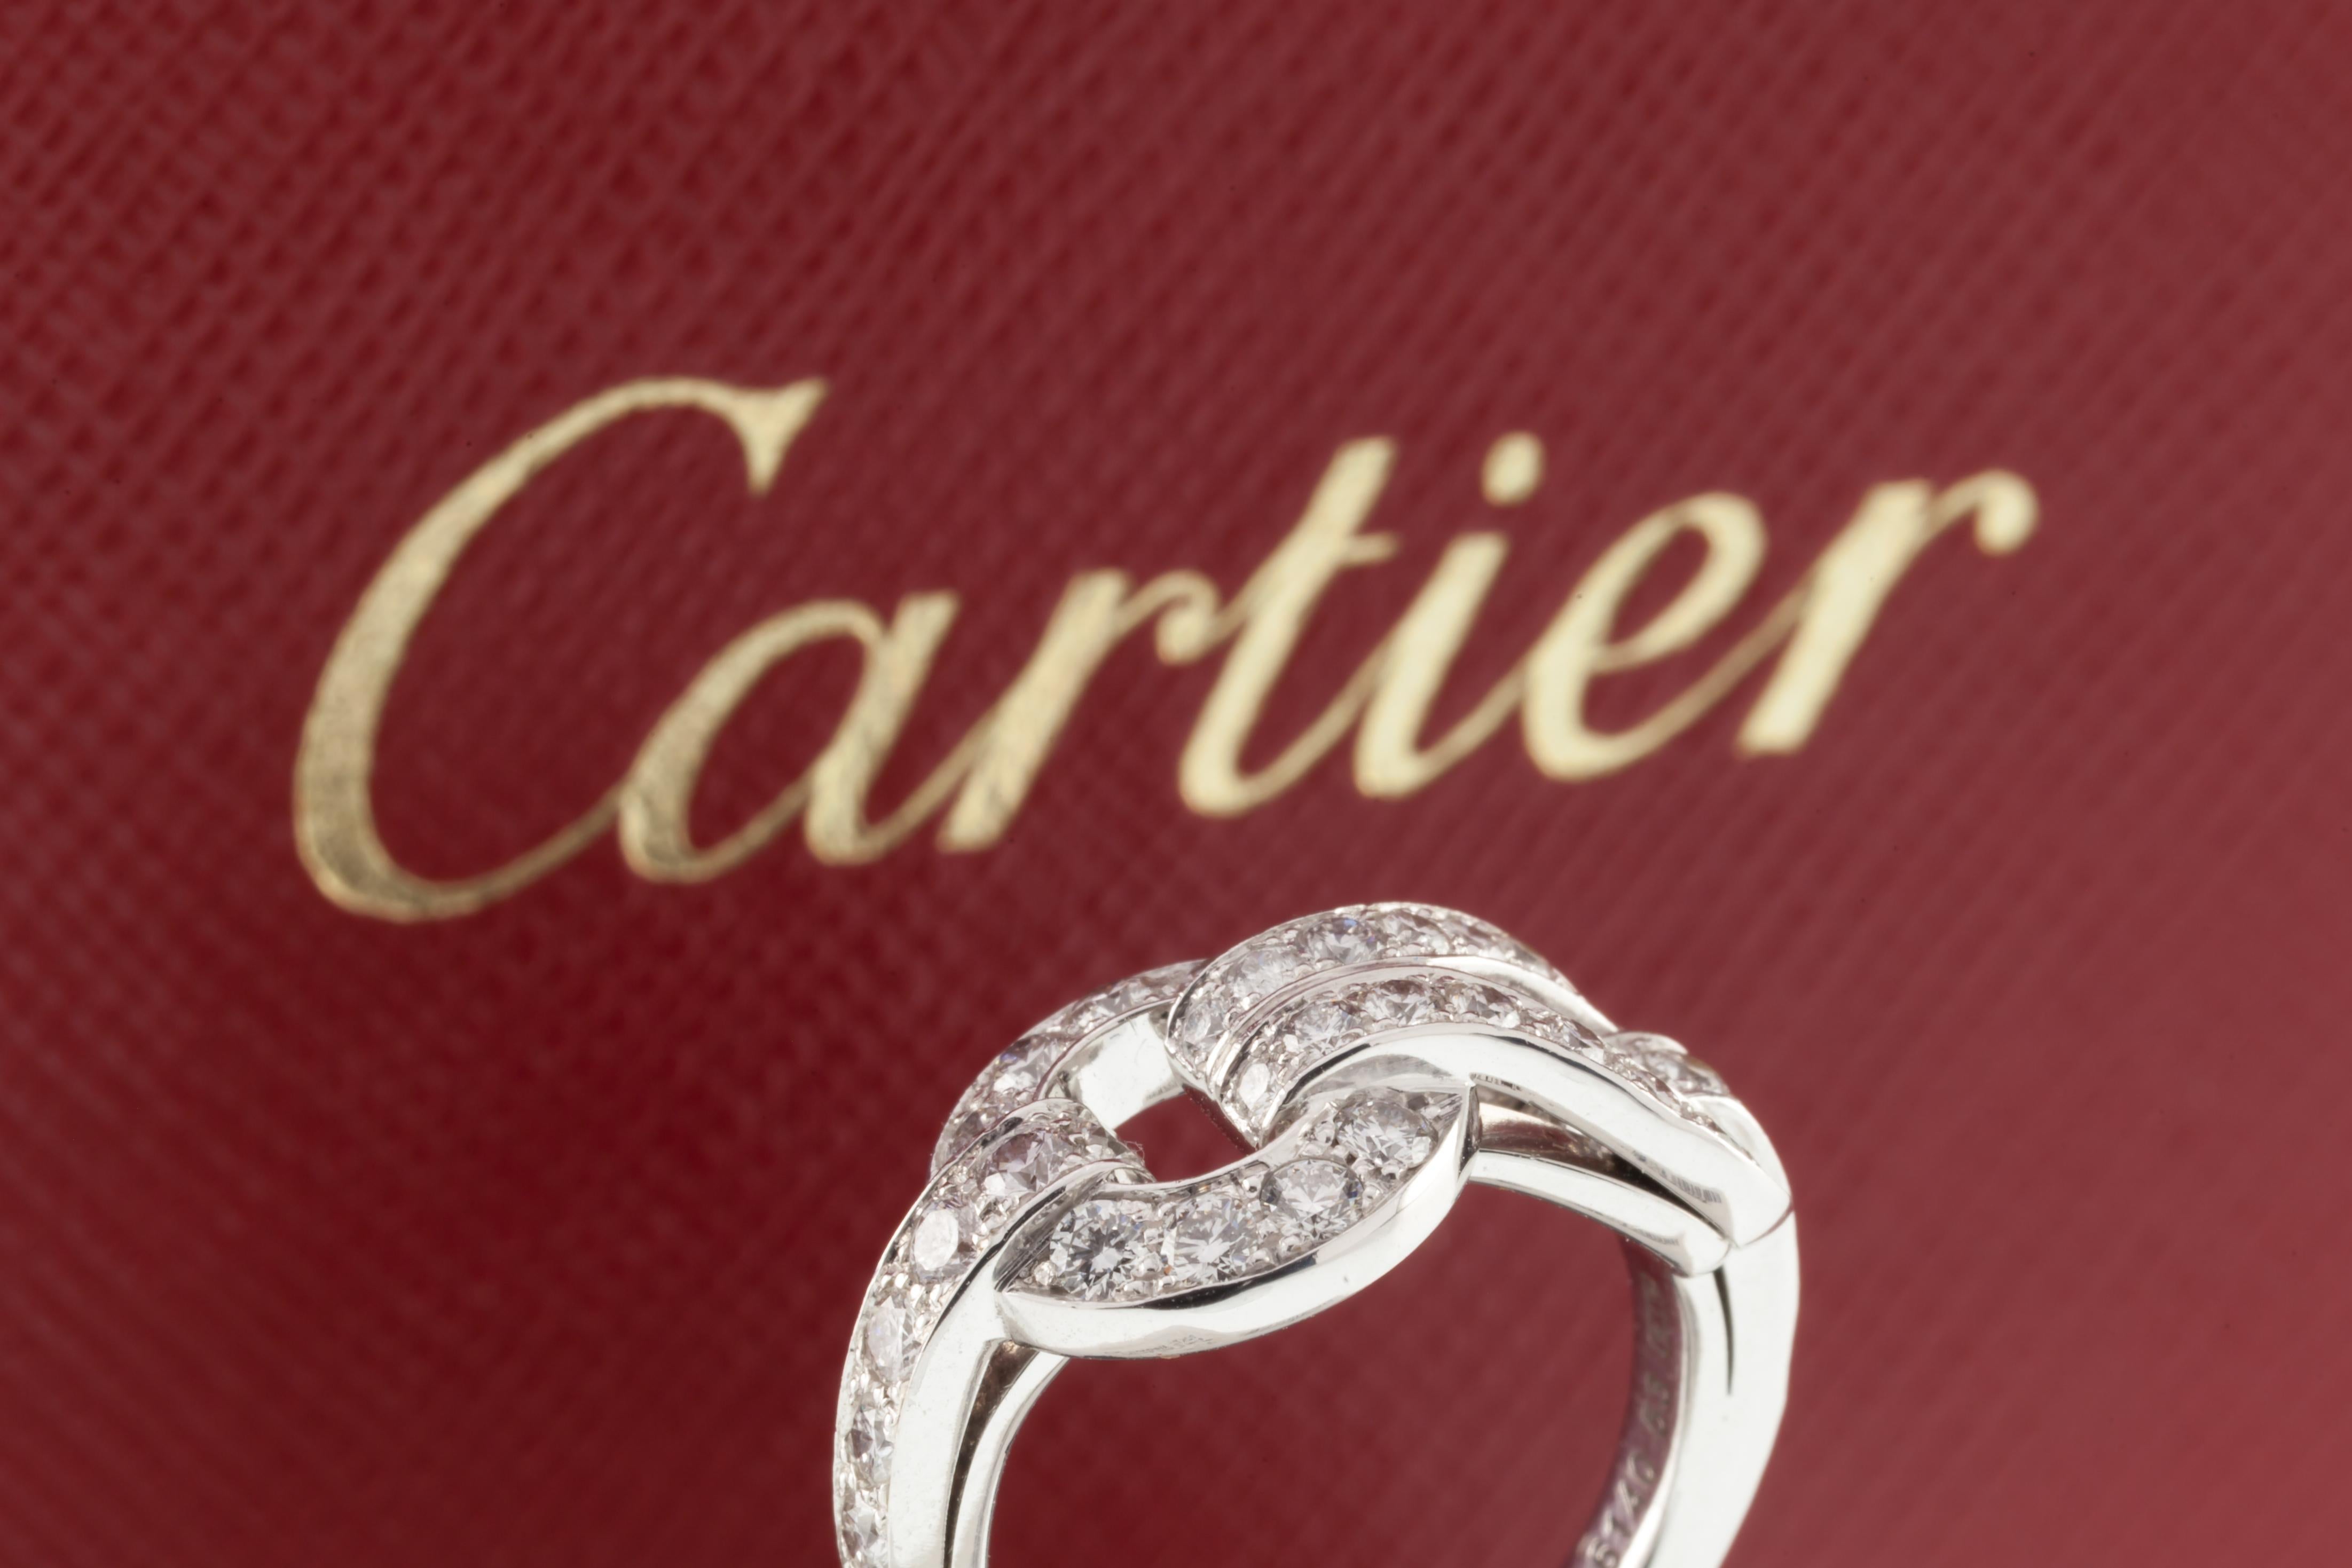 Cartier 18k White Gold Agrafe Band Ring 0.94 Ct w/ Original Box For Sale 2